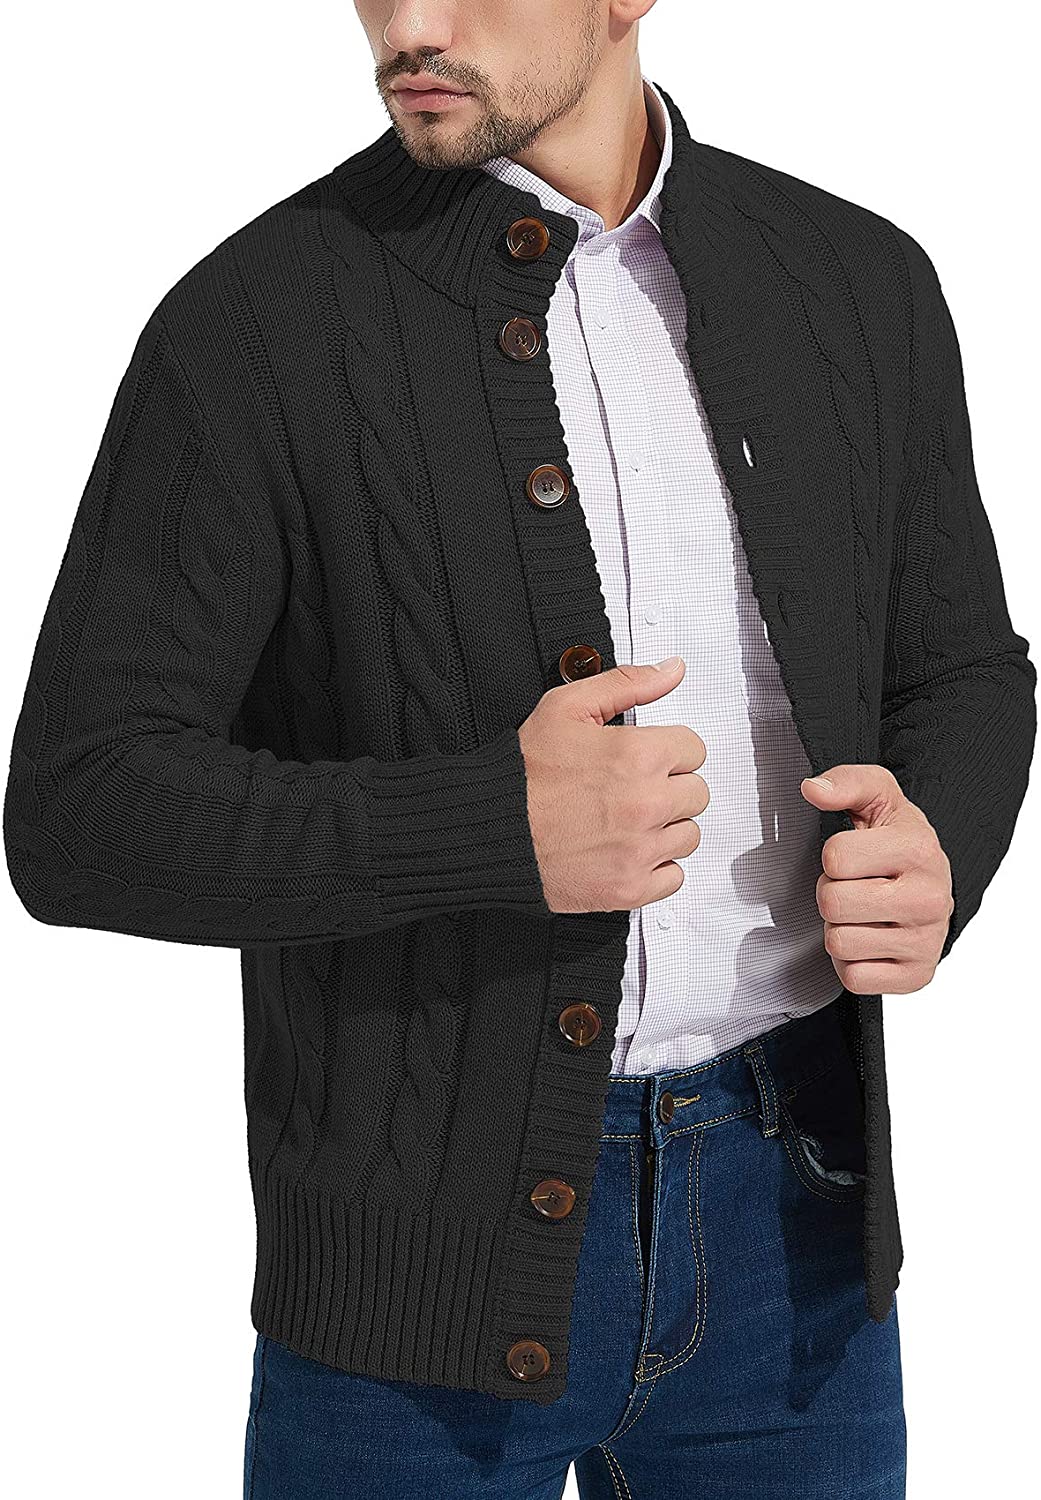 NITAGUT Mens Long Sleeve Stand Collar Cardigan Sweaters Button Down ...